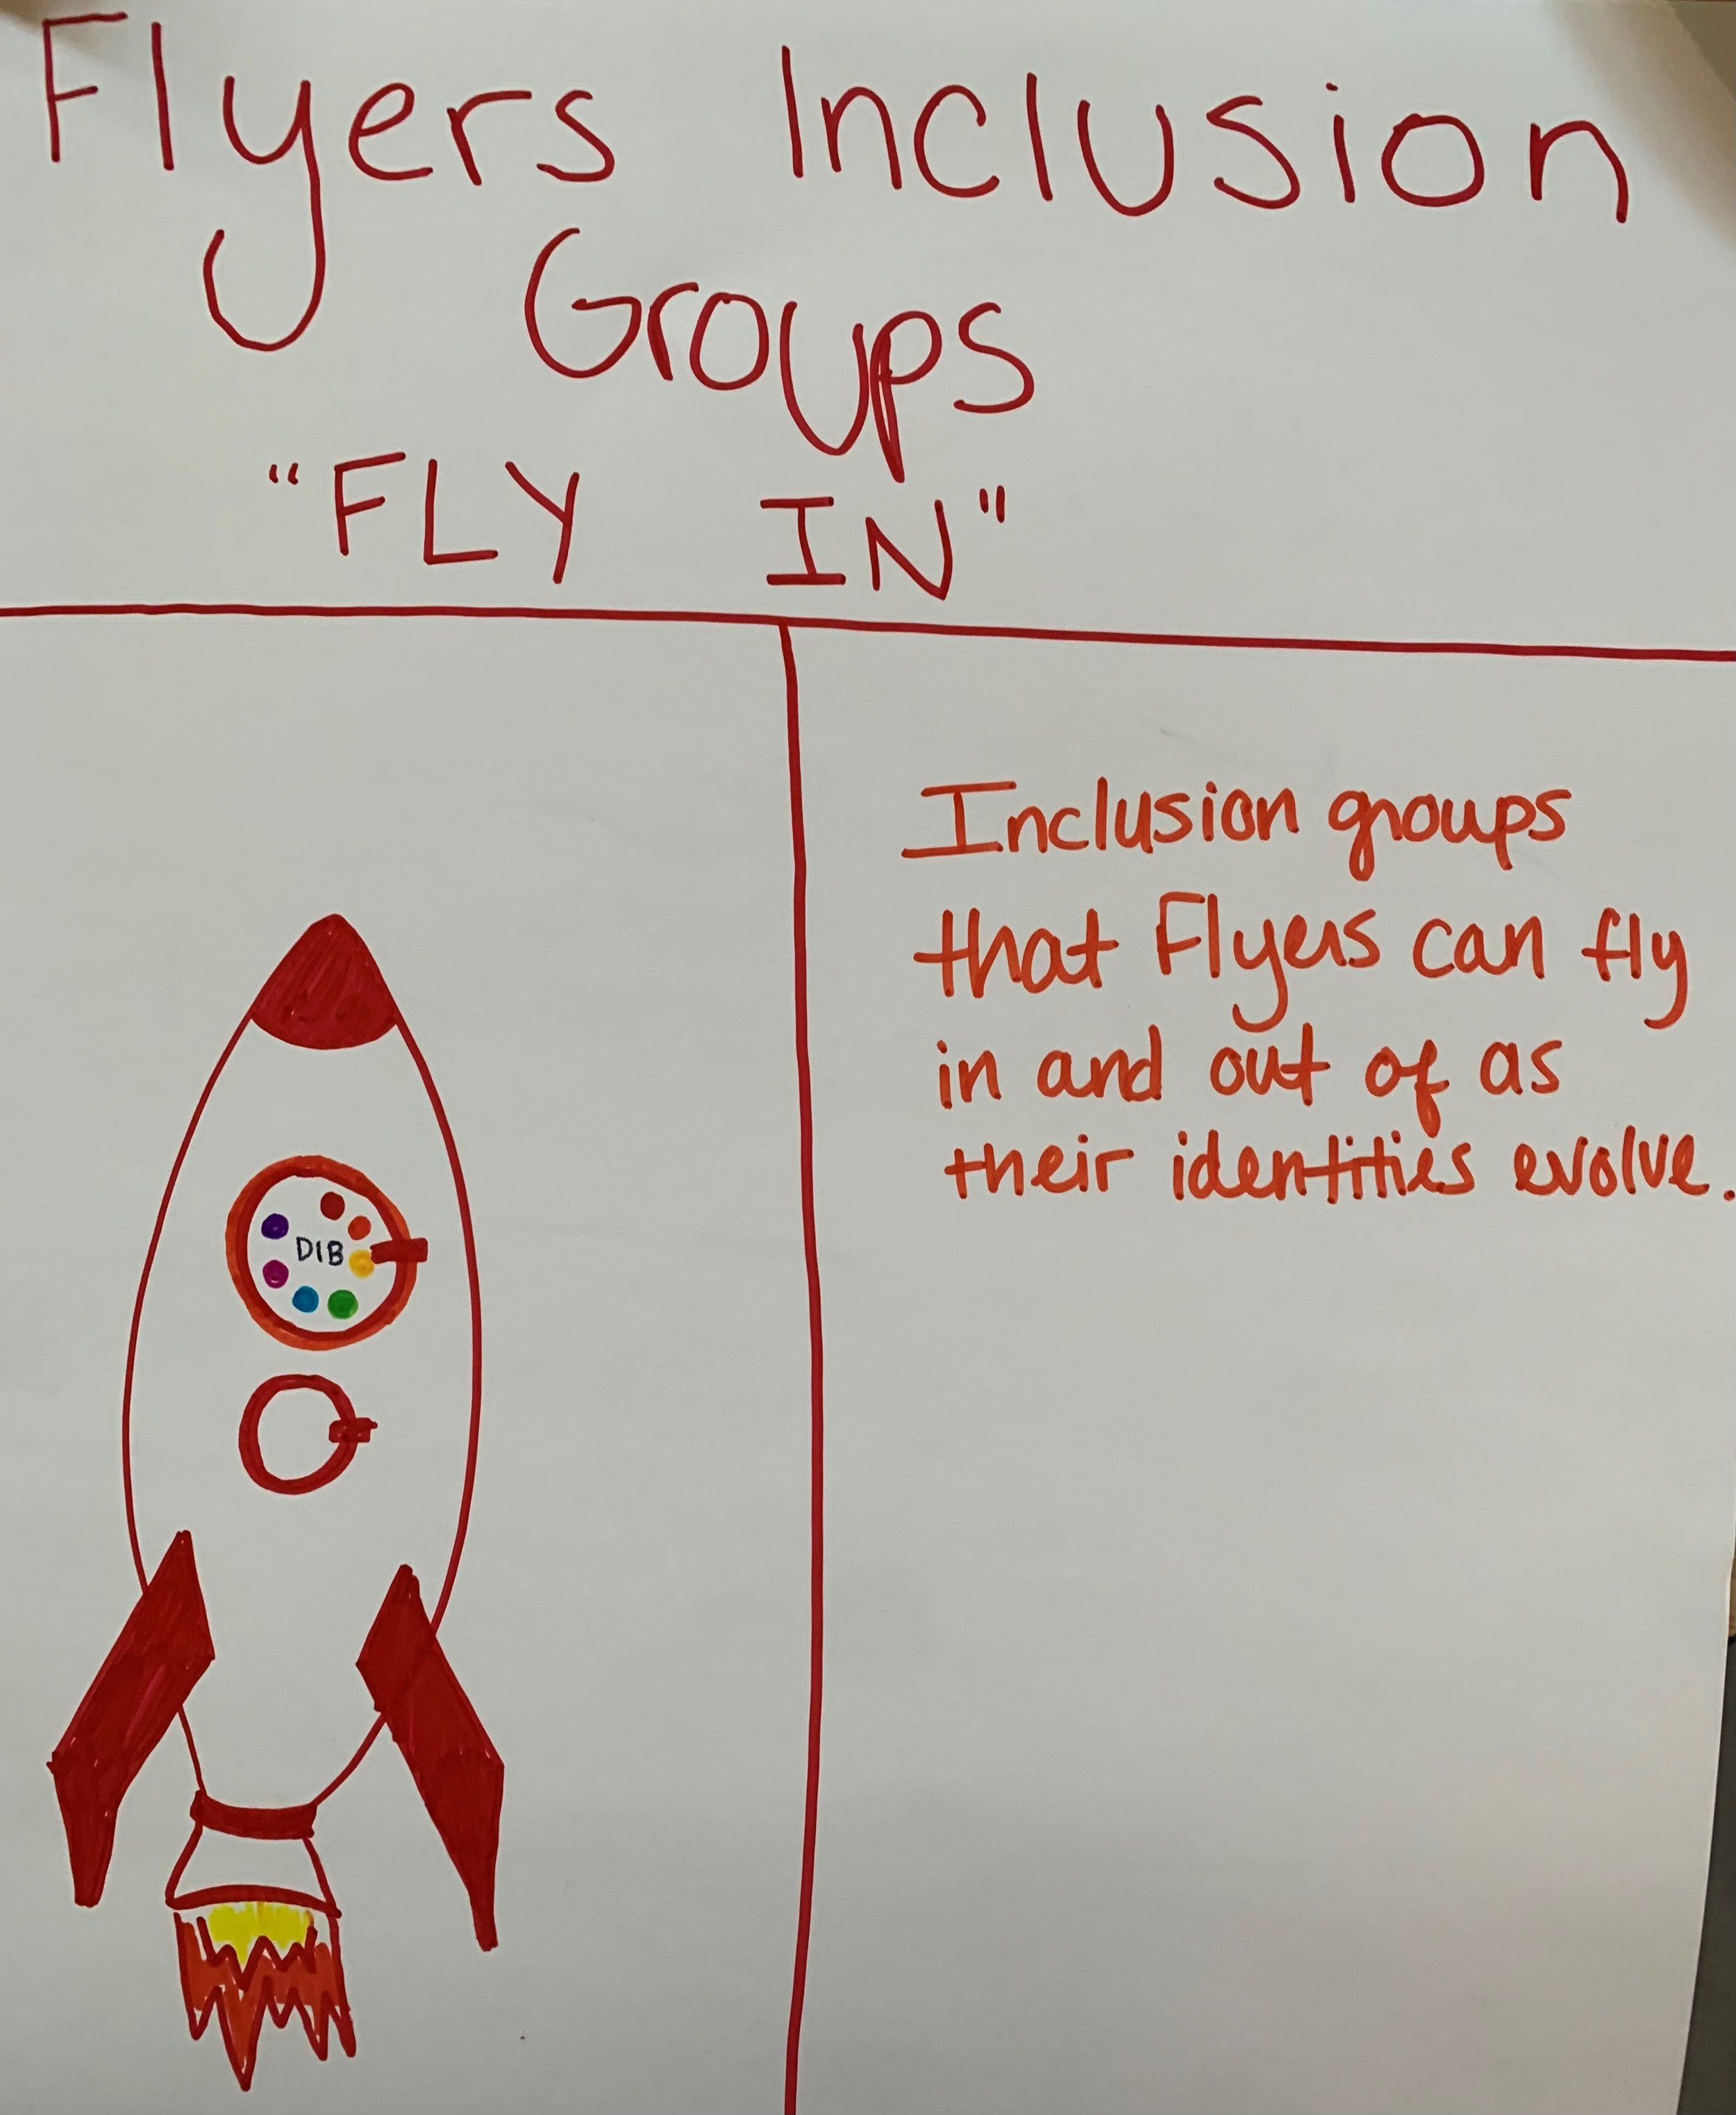 FLYERS INCLUSION GROUPS